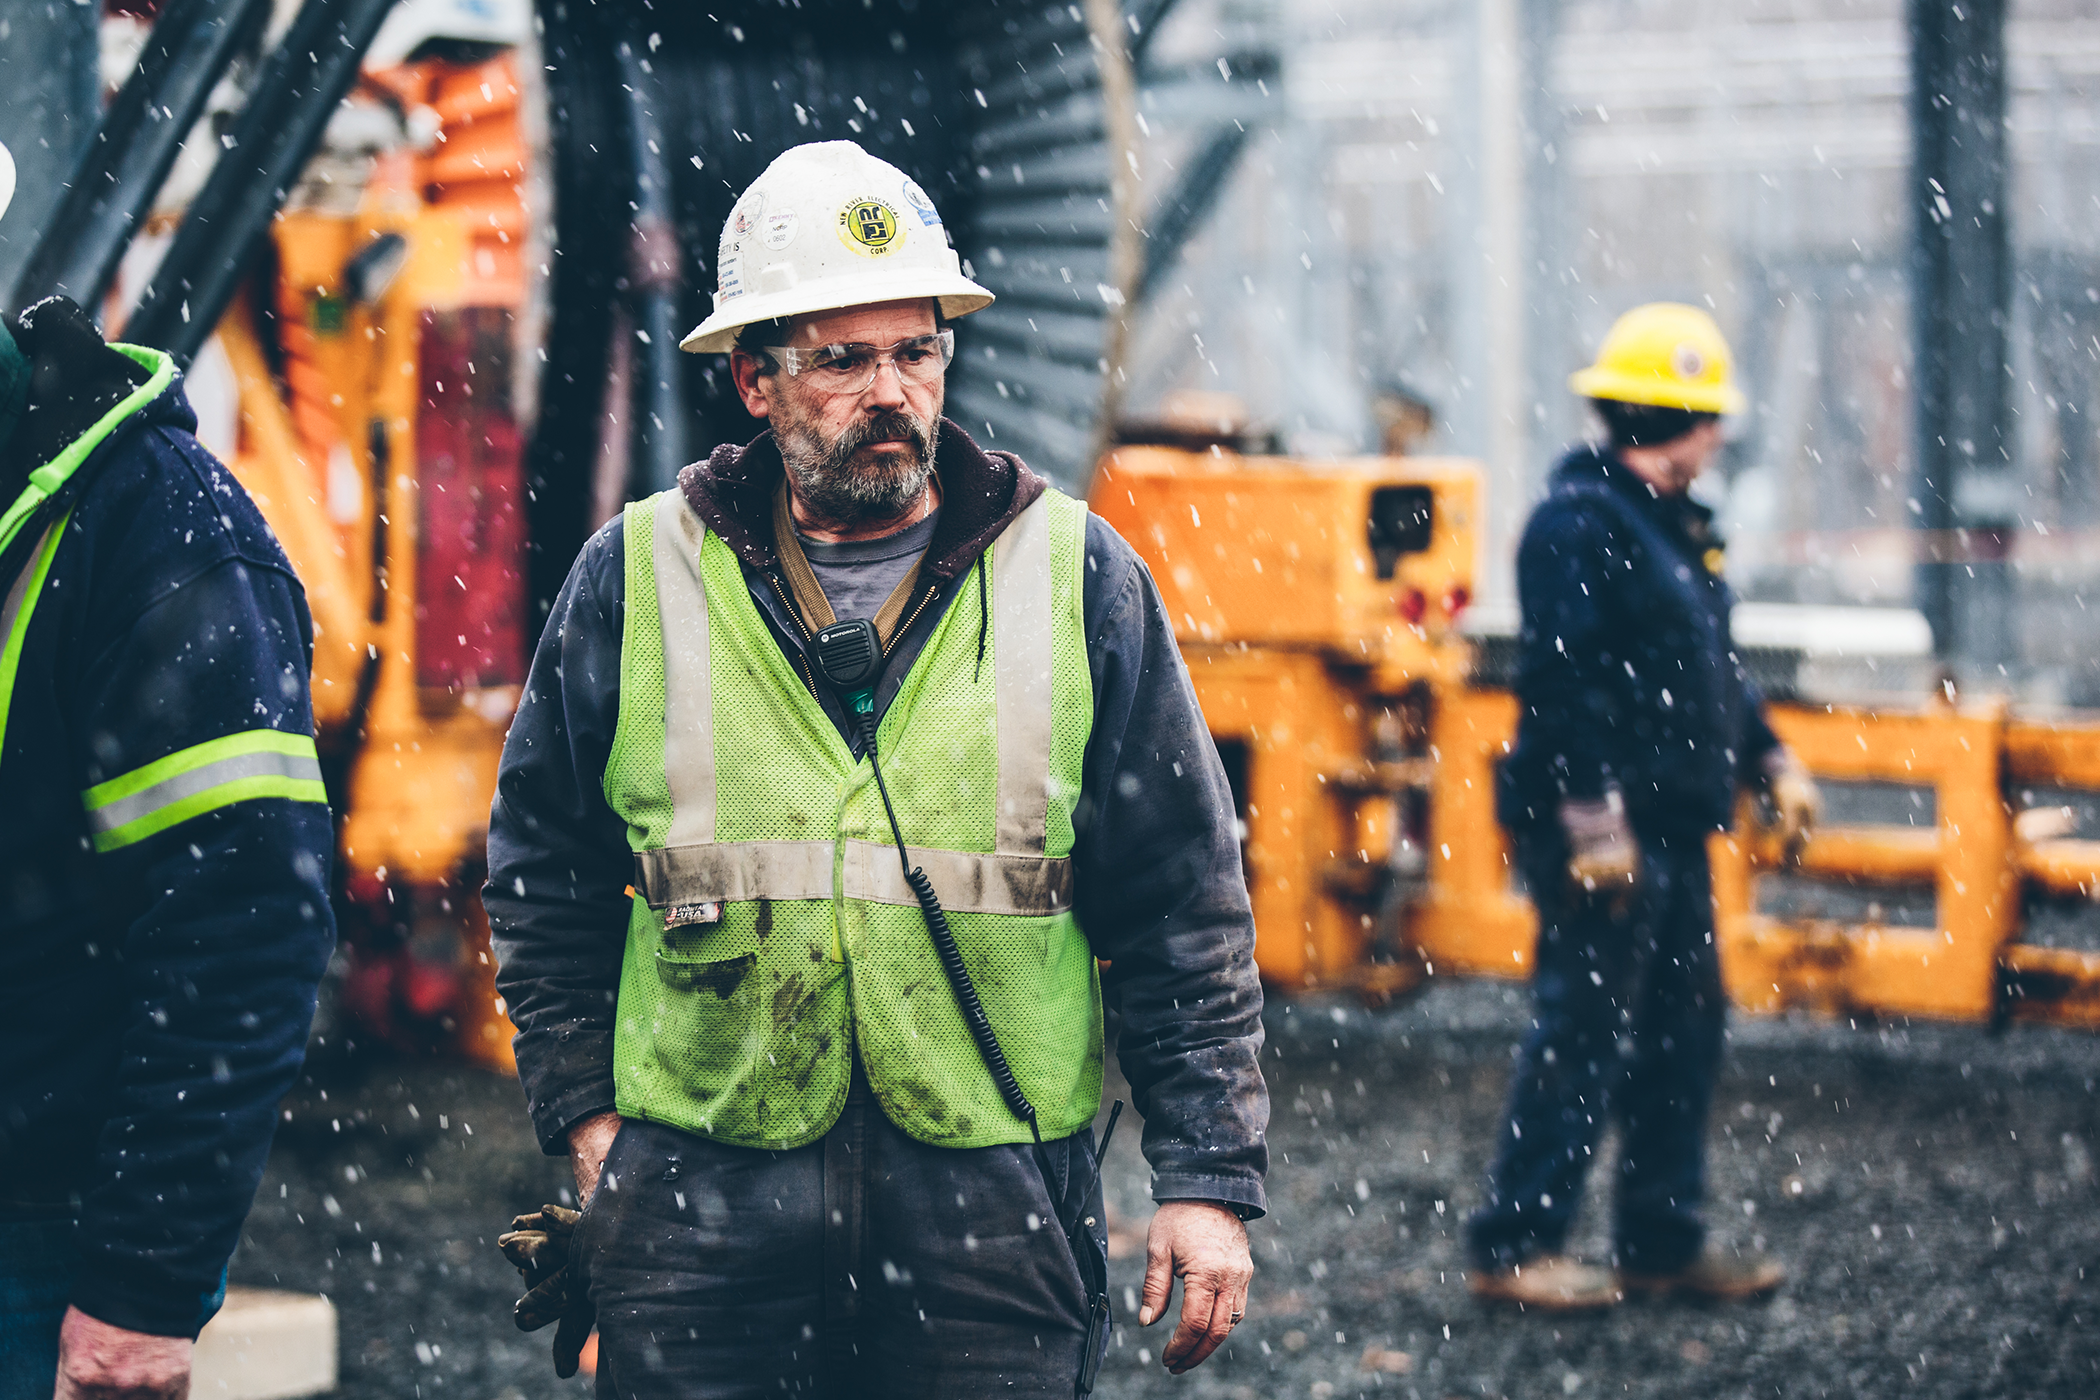 A worker in a reflective vest and hard hat walks through a construction site with heavy machinery in the background, under a light snowfall.